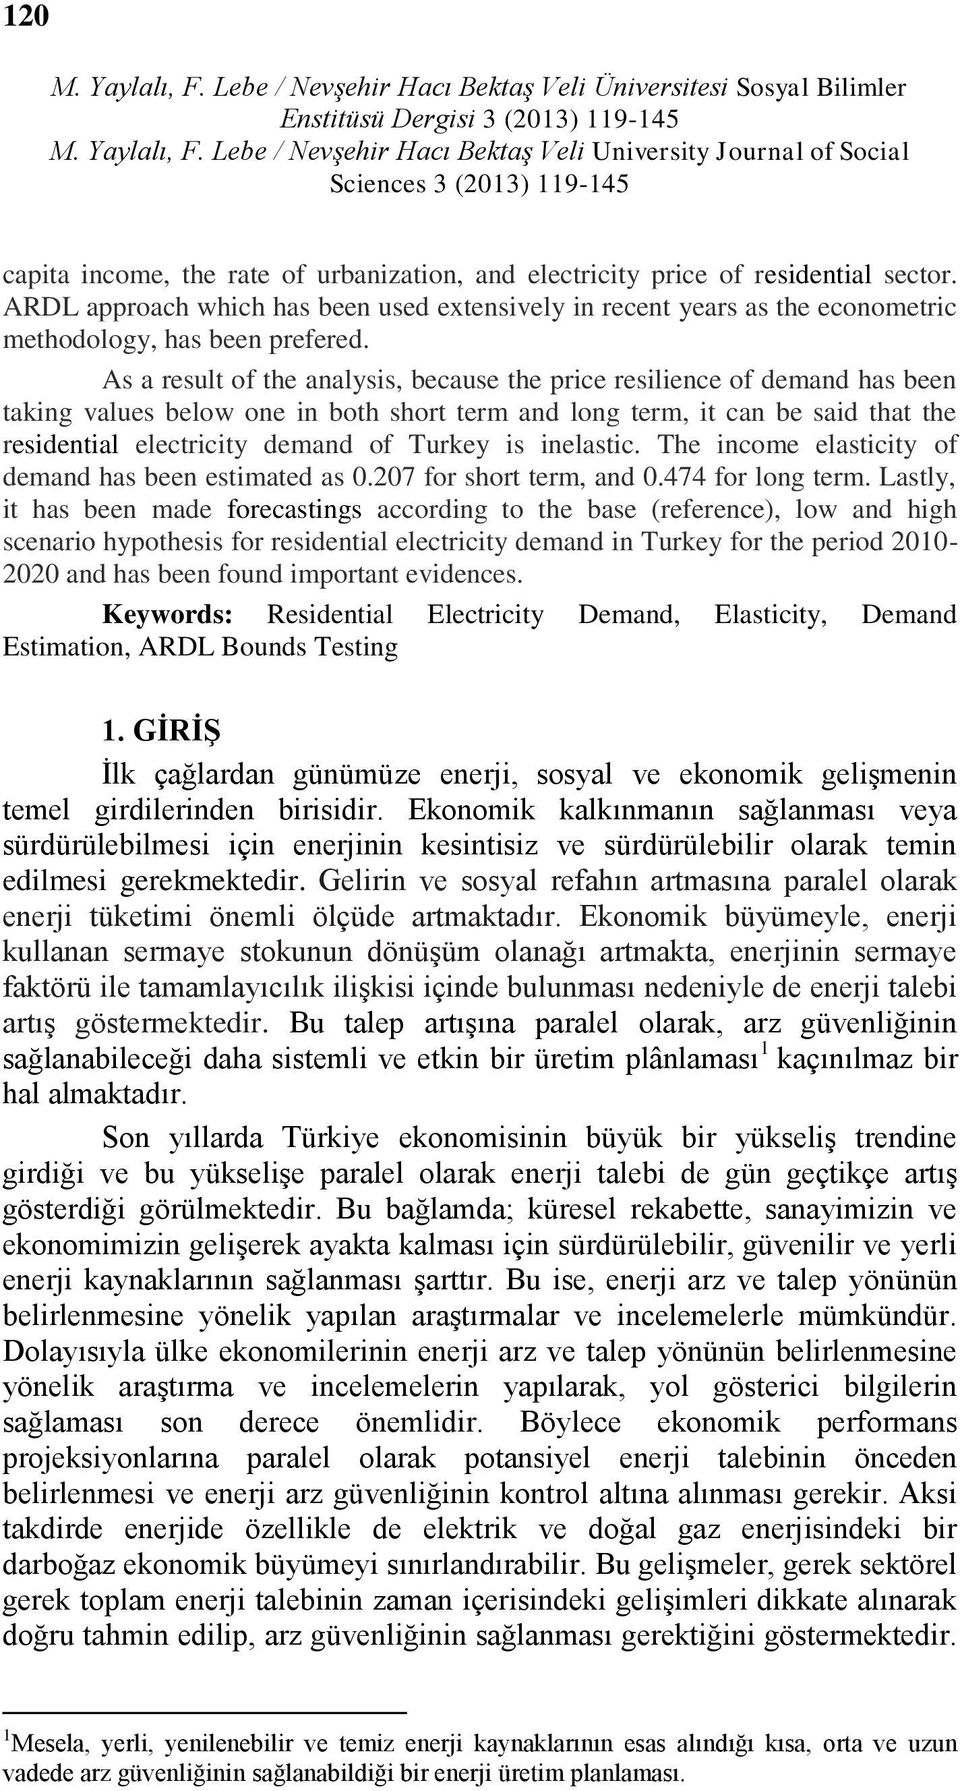 As a result of the analysis, because the price resilience of demand has been taking values below one in both short term and long term, it can be said that the residential electricity demand of Turkey